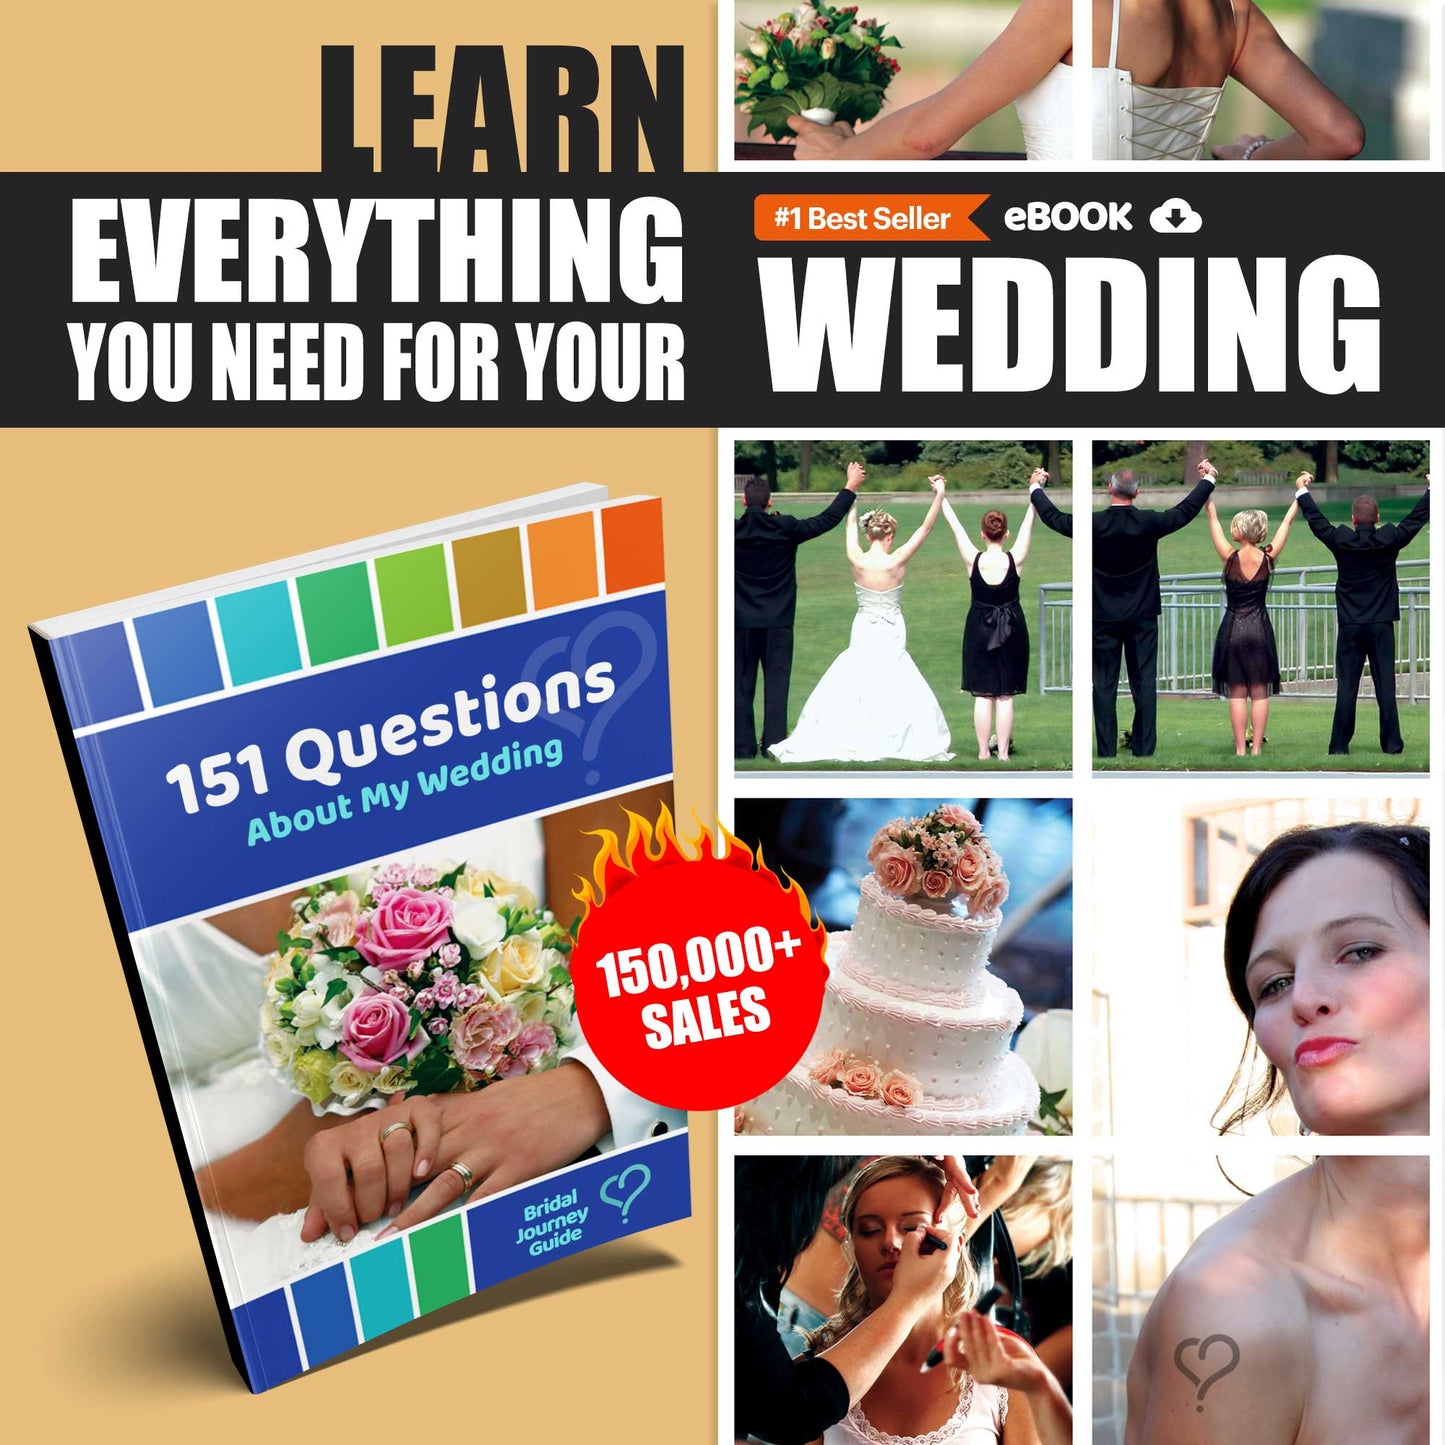 151 Questions About My Wedding